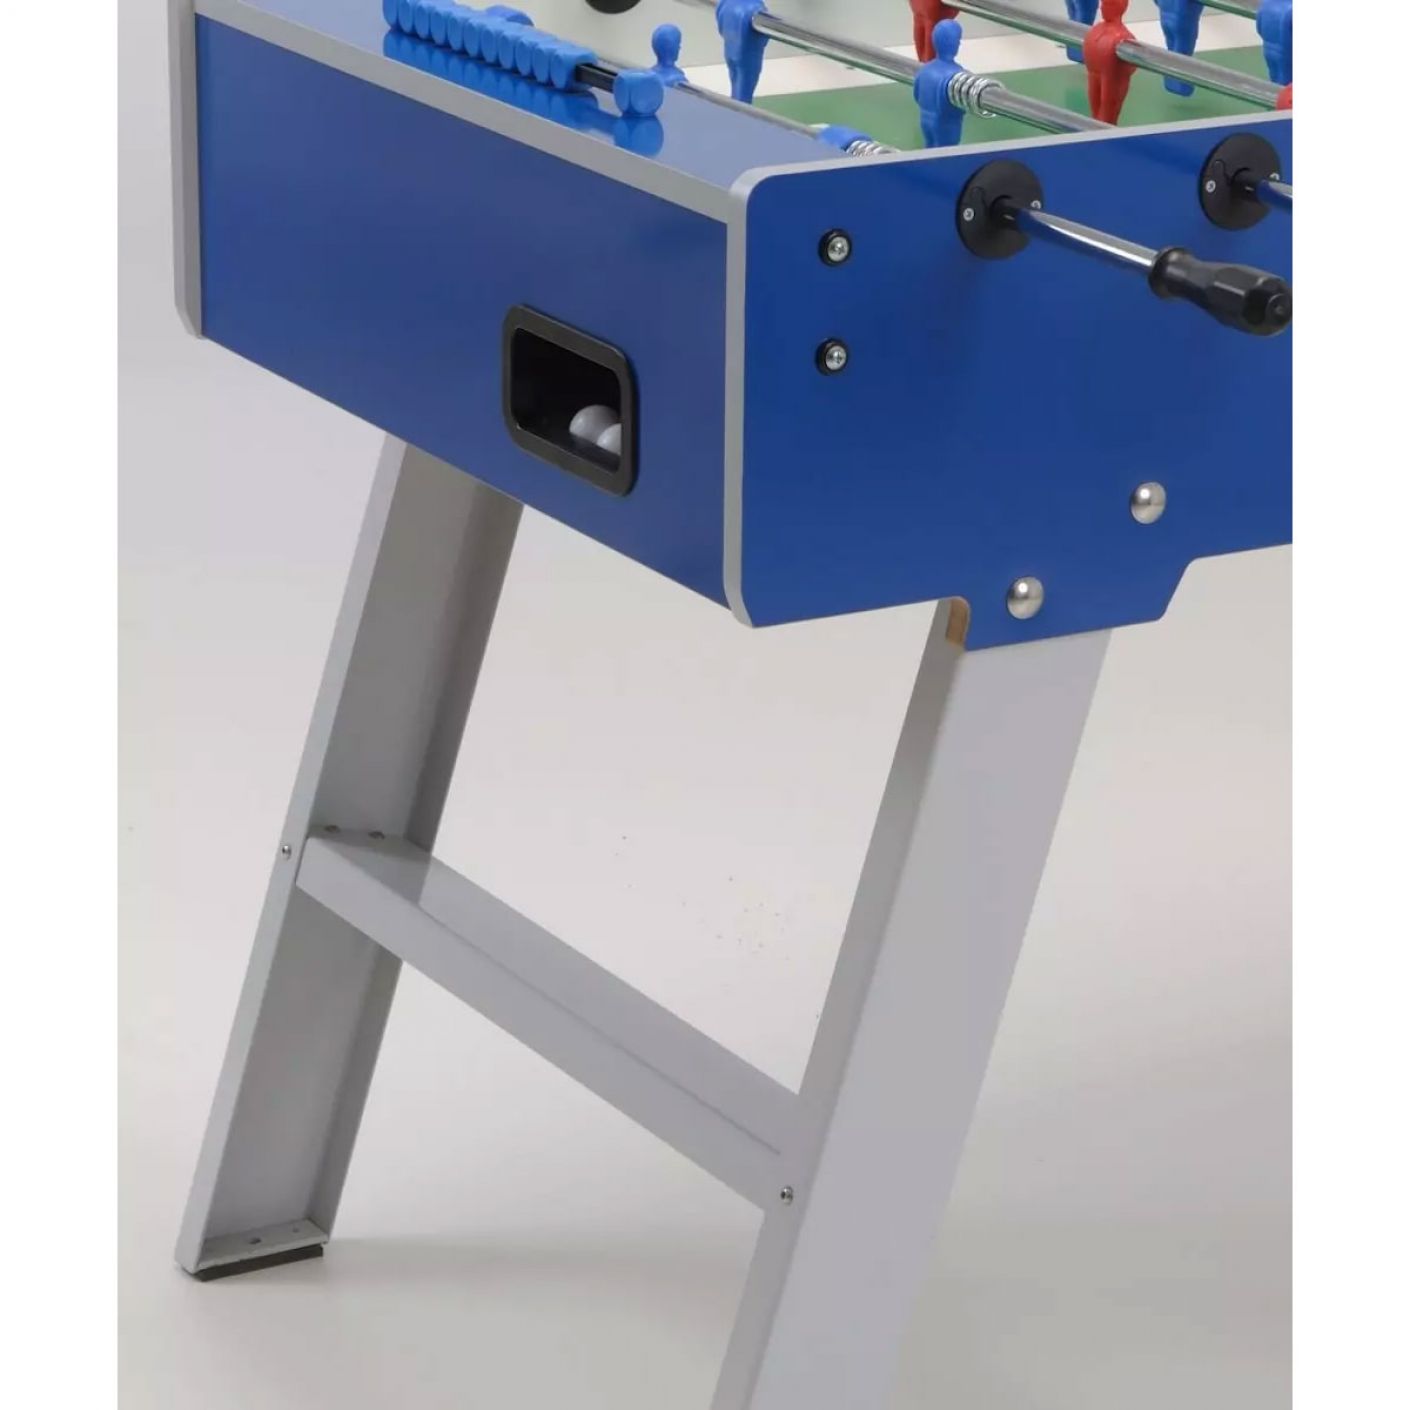 Garlando Football Table Master Pro Weatherproof with retracting temples, folding legs